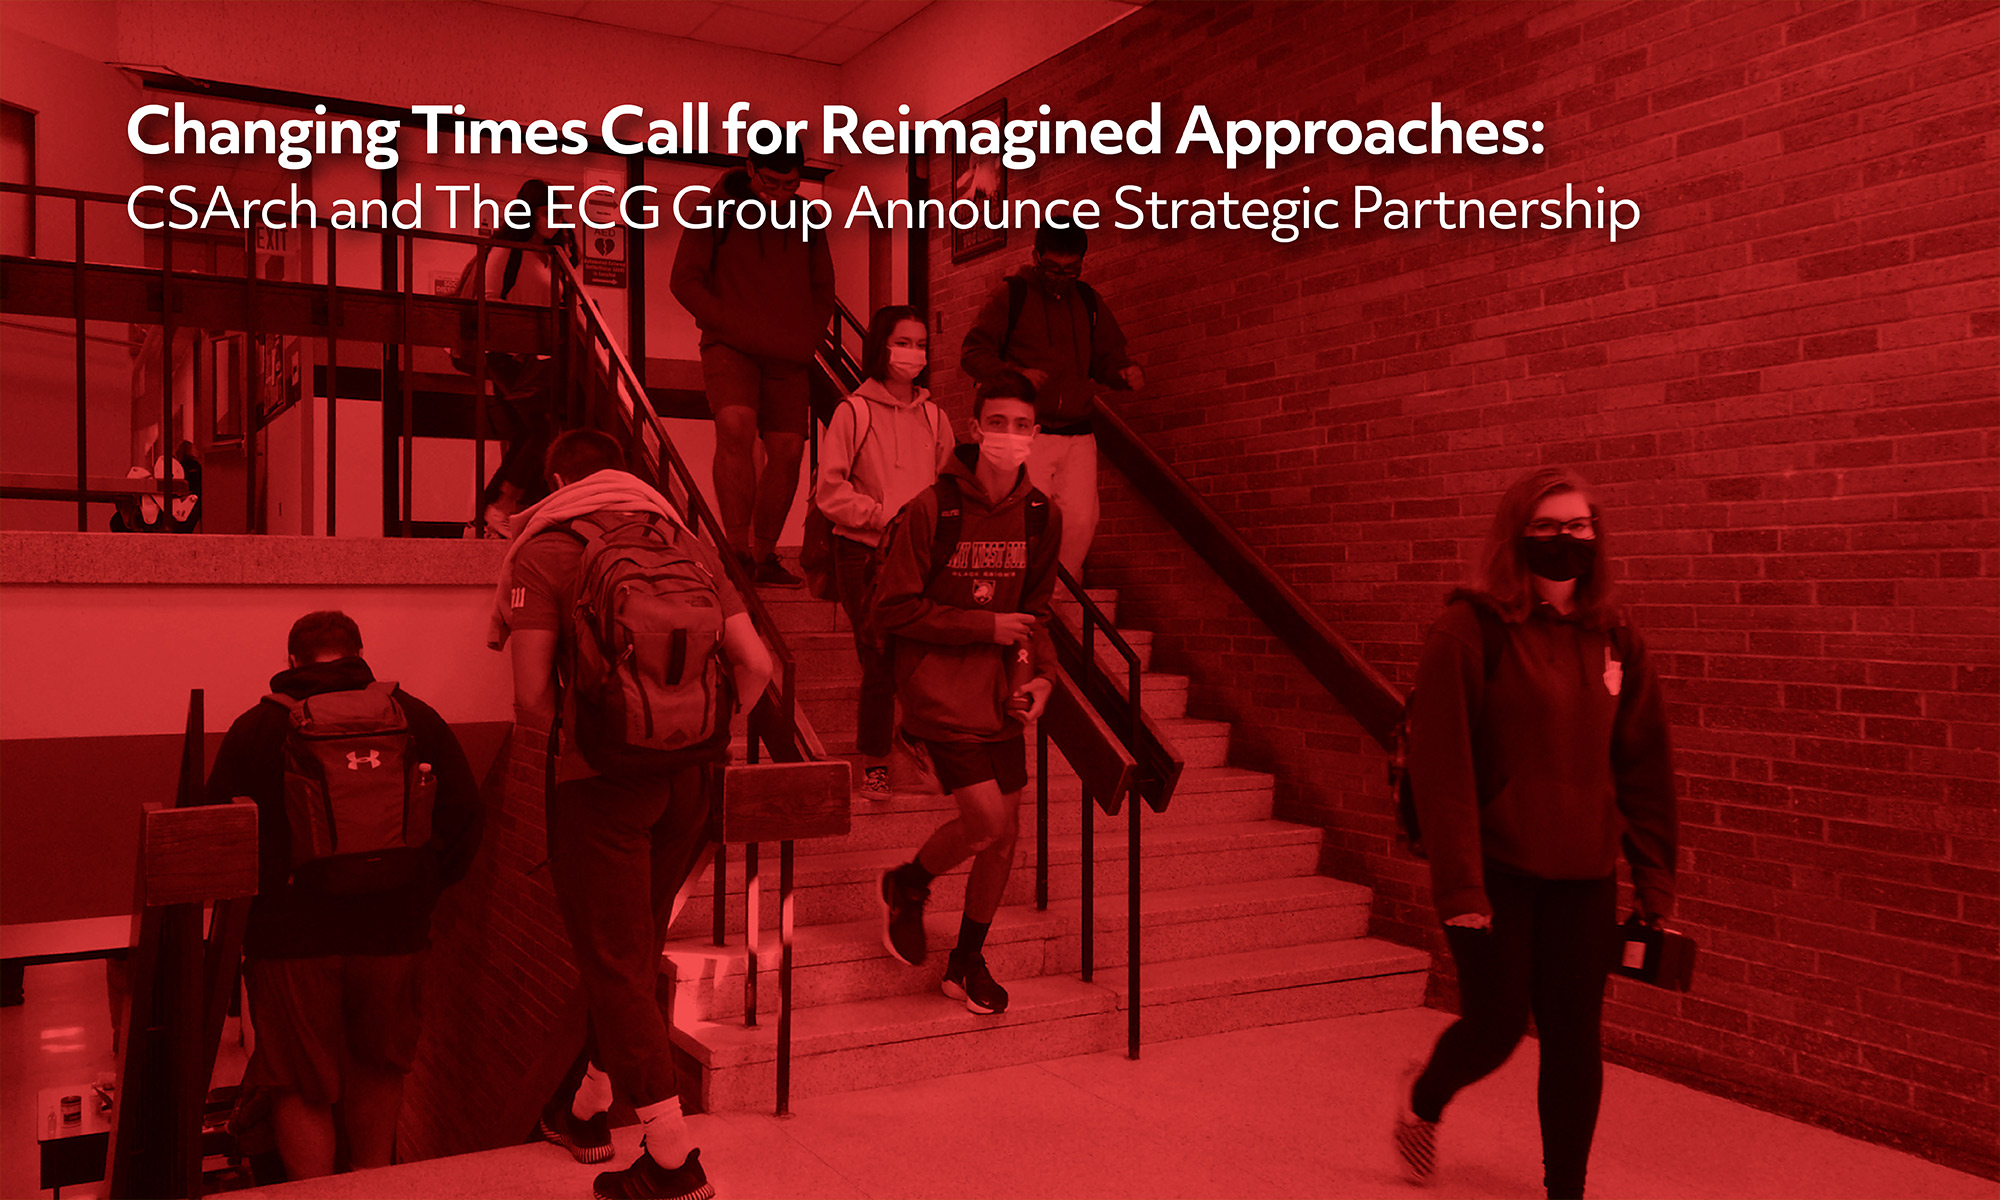 CSArch and The ECG Group Announce Strategic Partnership